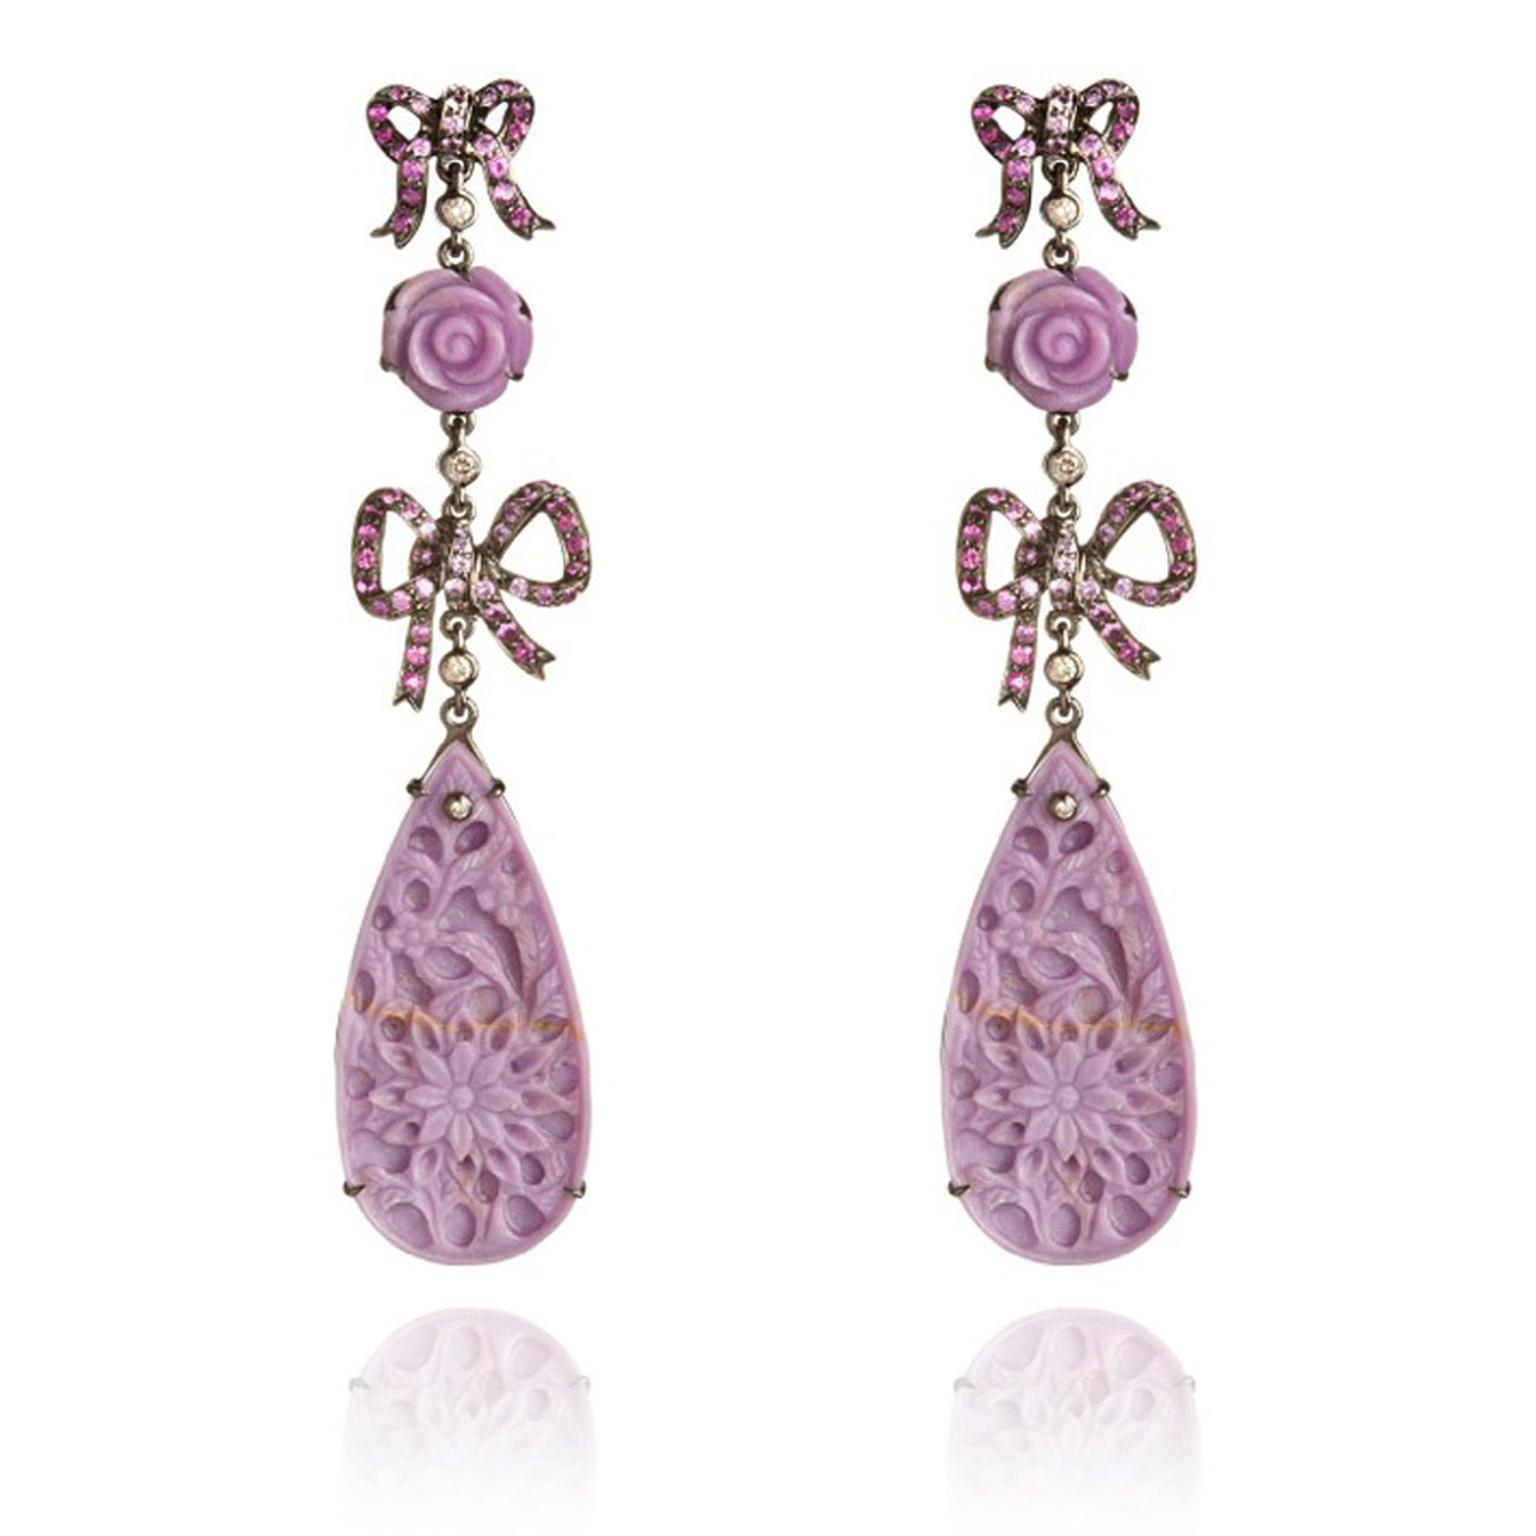 Wendy-Yue-Fantasie-18ct-white-gold,--diamond,sapphire-and-Phosphosiderite--Sherbet-Bow-earrings-By-Wendy-Yue-for--Annoushka.jpg